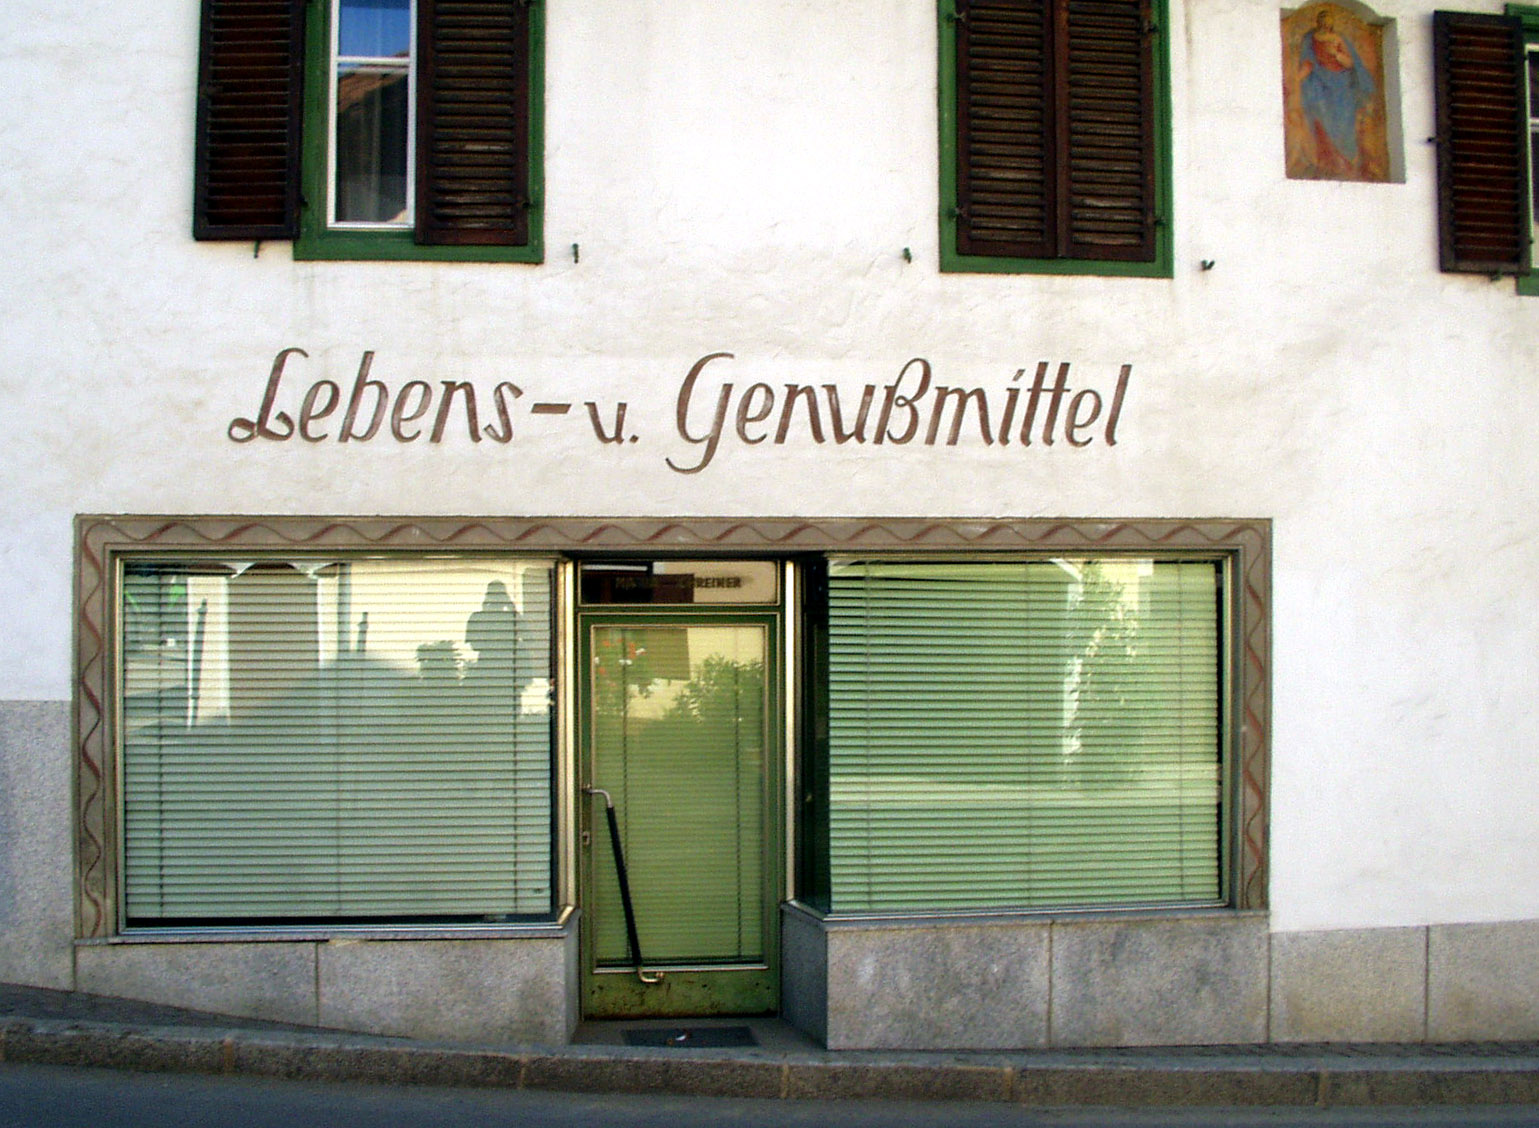 a store front with green windows has the words gerbens - u genusmintell above the windows